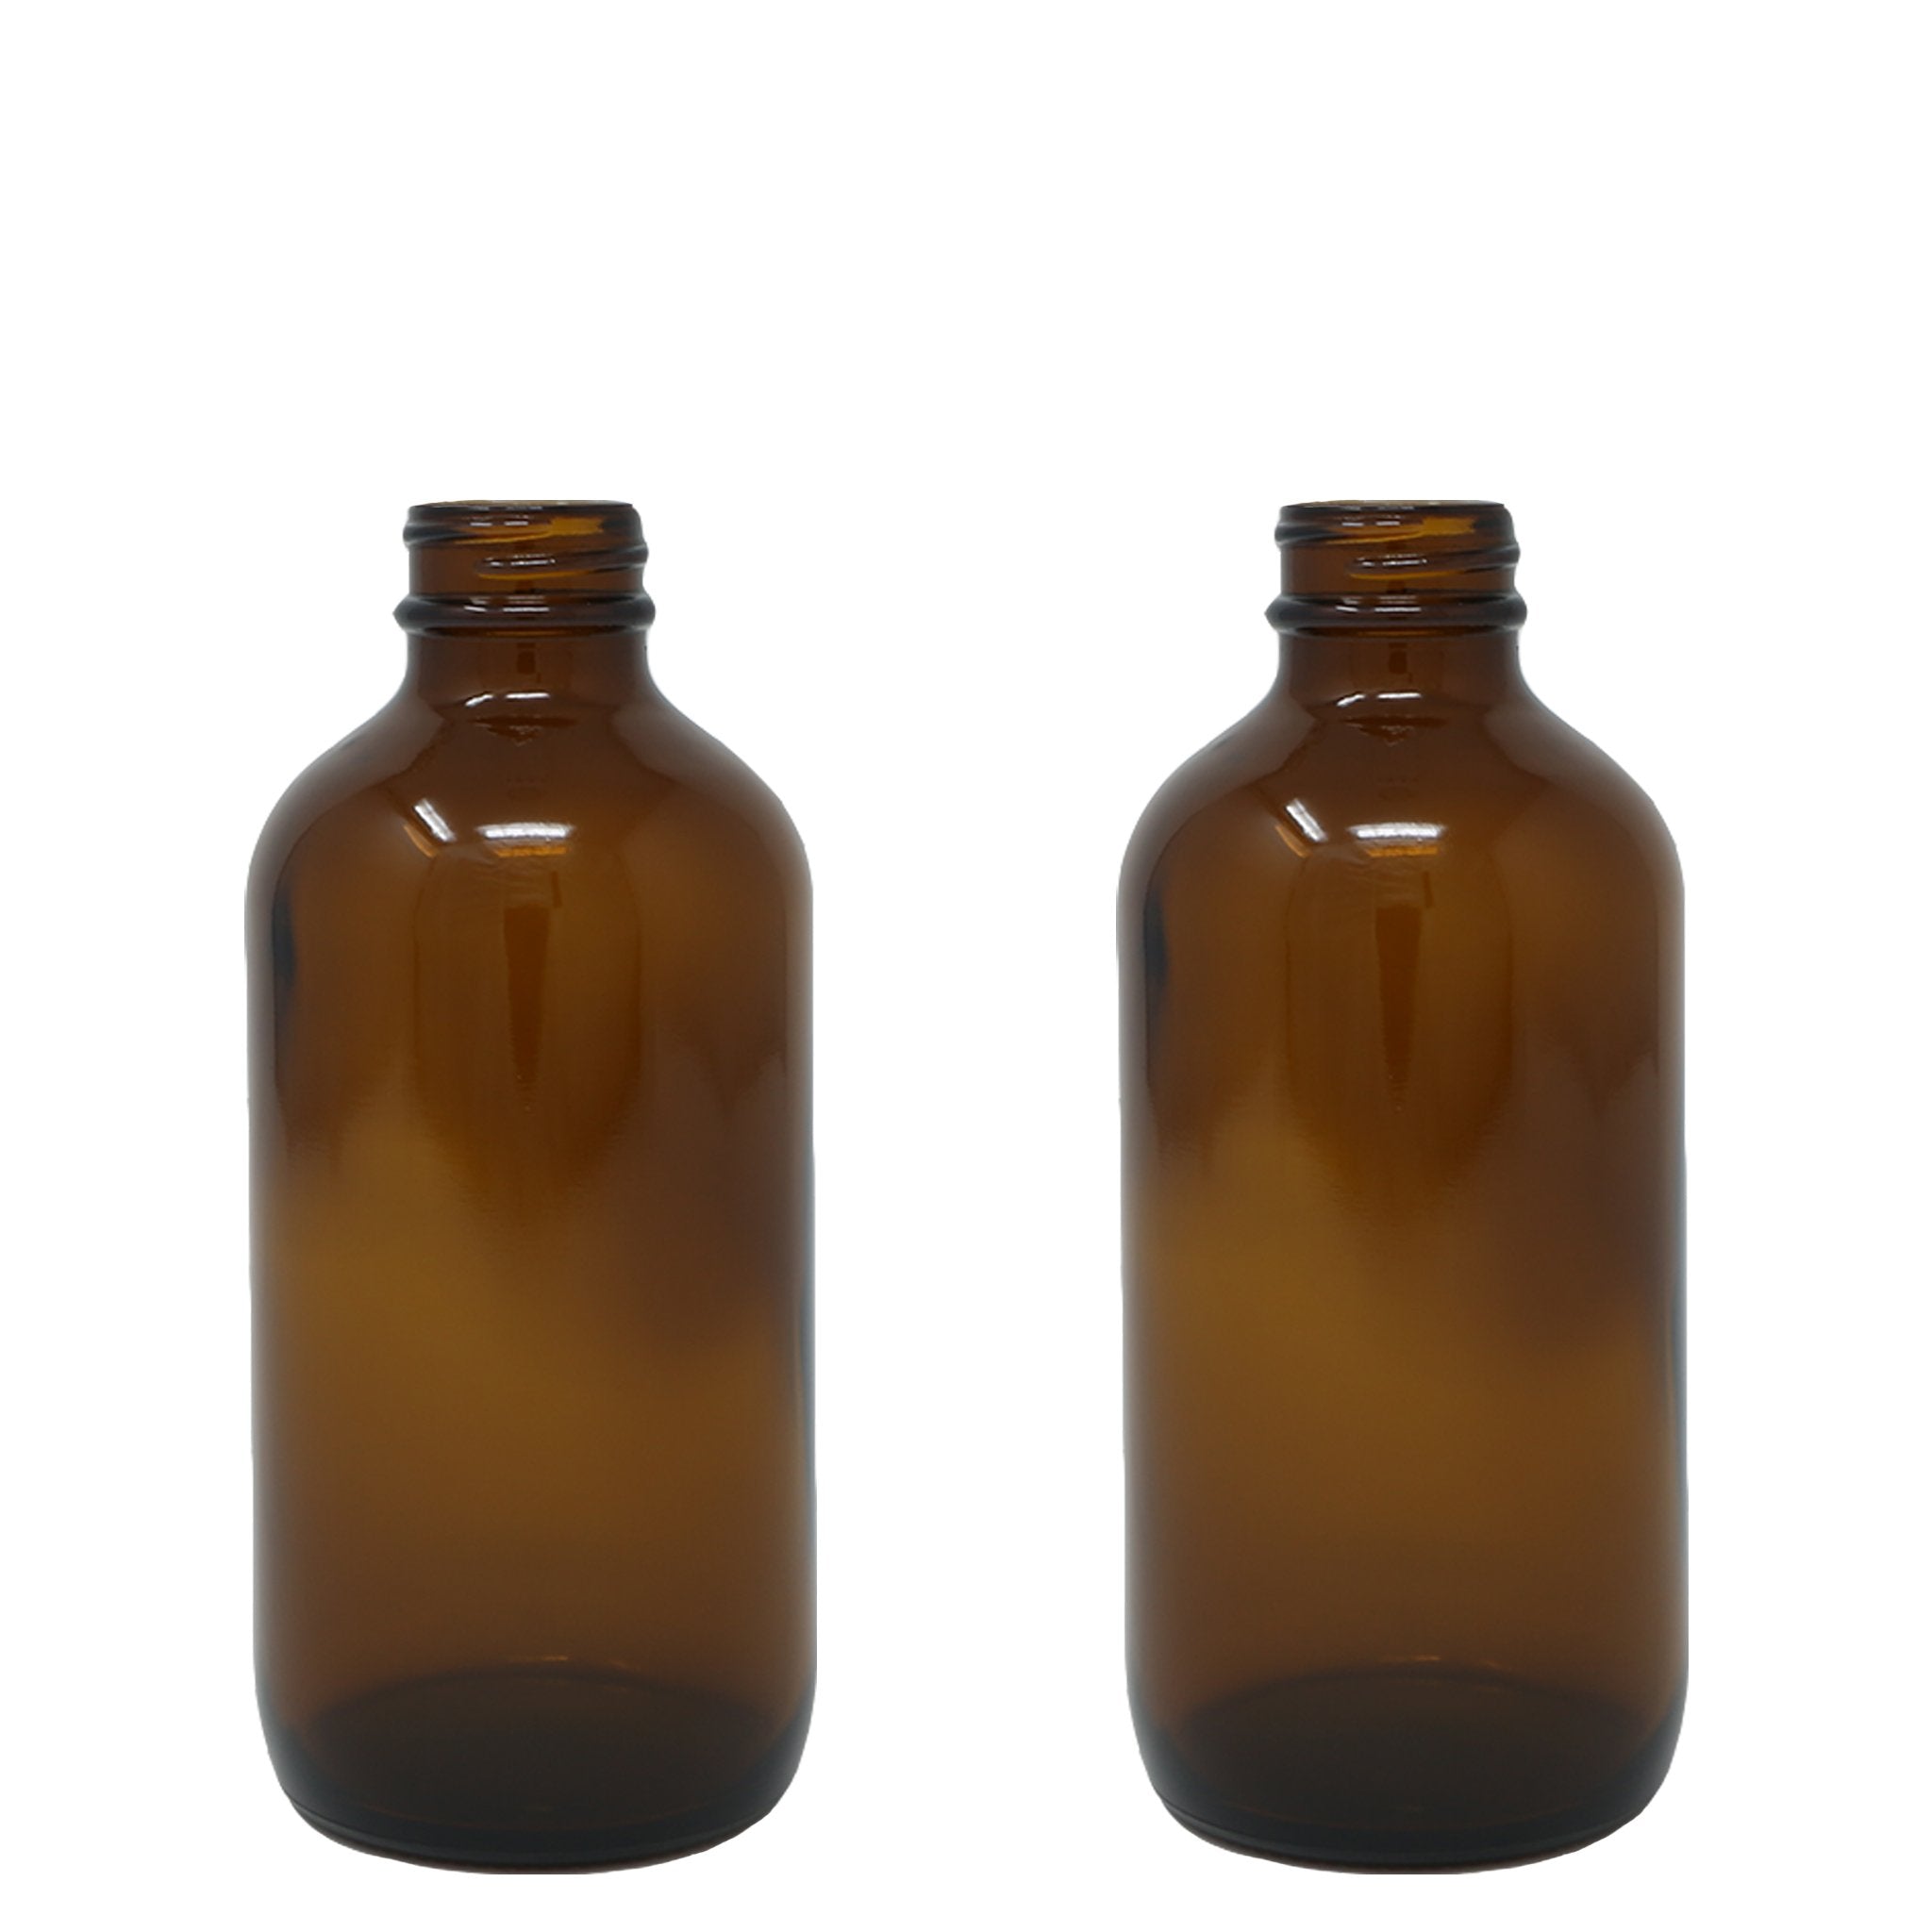 8 Oz (240 mL) Amber Glass Bottles, Caps Included